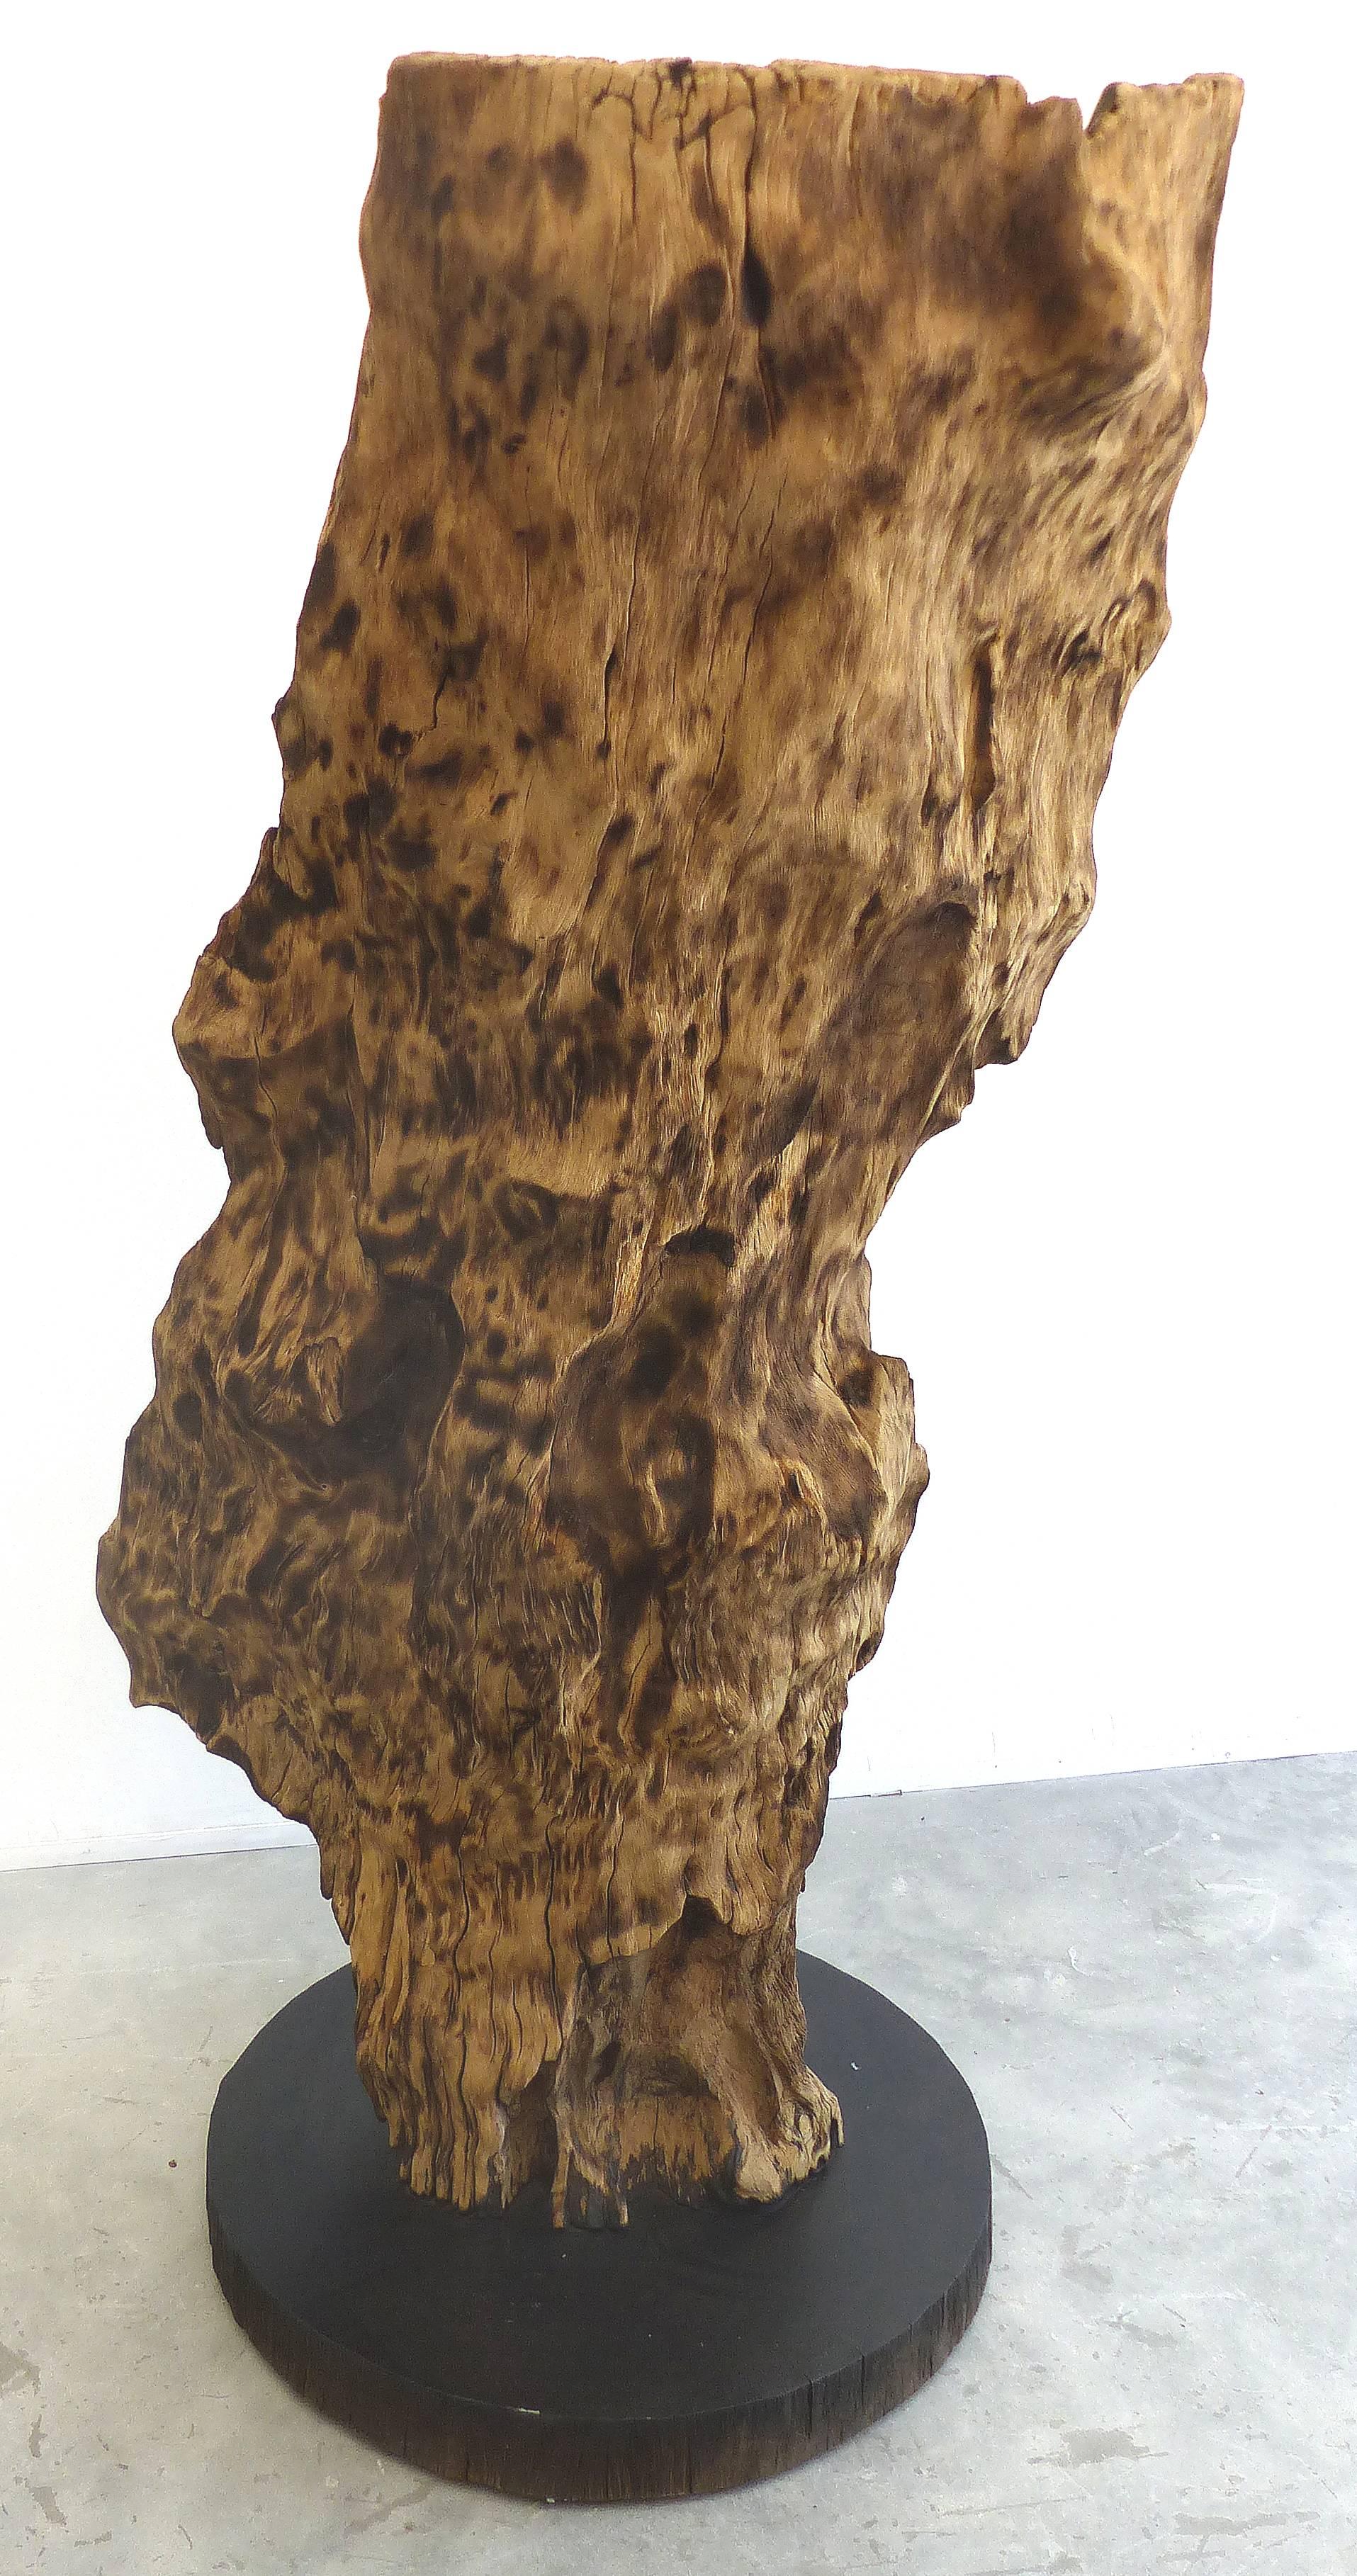 Monumental Reclaimed Wood Sculpture from the Brazilian Amazon by Valeria Totti

A monumental reclaimed wood organic sculpture salvaged from Amazonian forest fires and is presented on an Ipe wood base. Found in the Amazon by artist Valeria Totti who